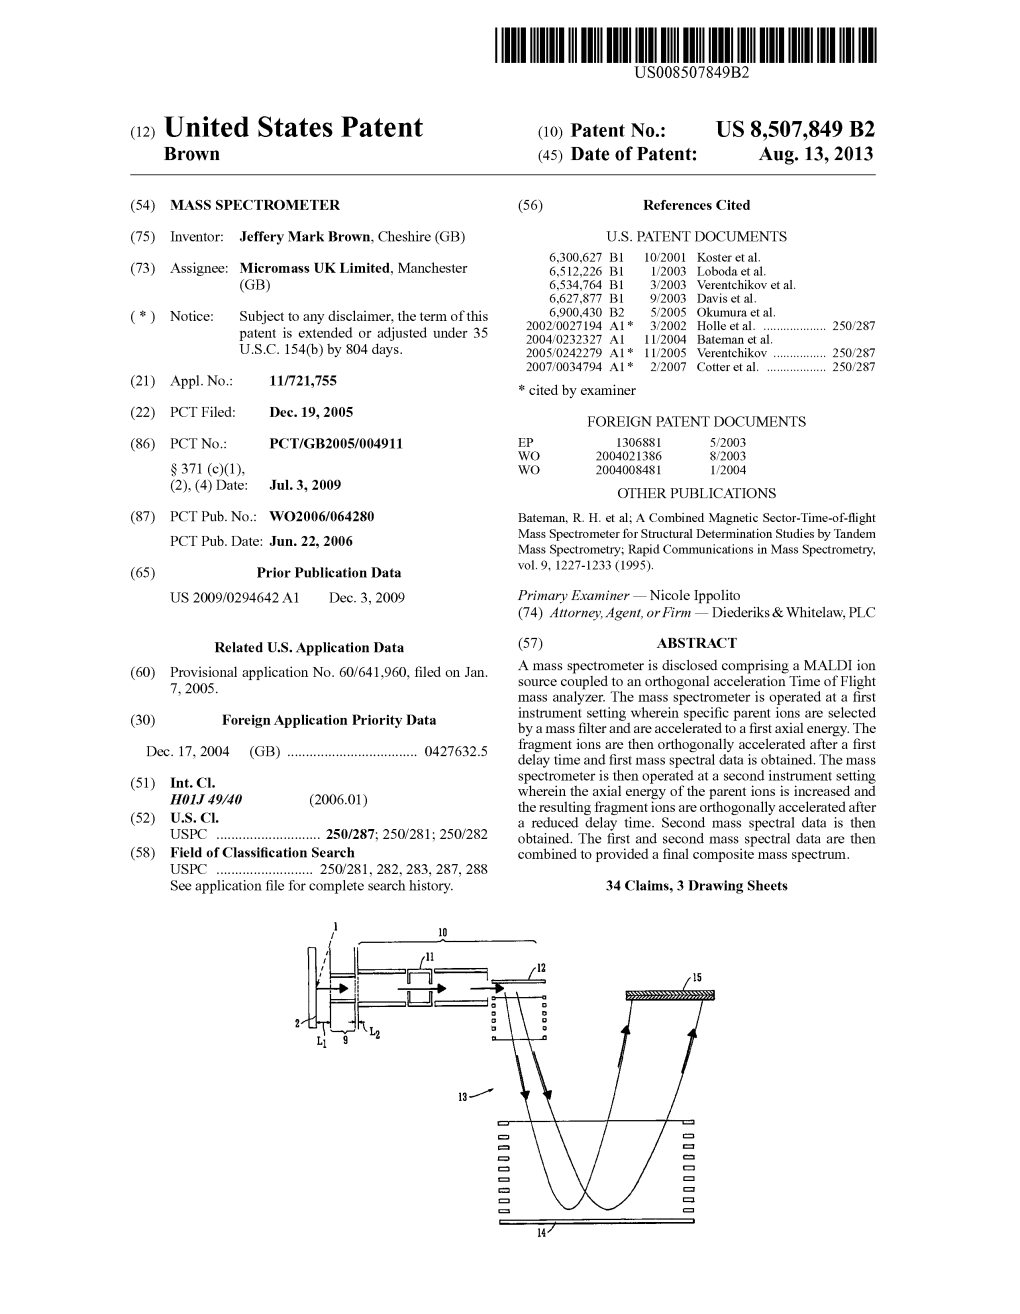 (12) United States Patent (10) Patent No.: US 8,507,849 B2 Brown (45) Date of Patent: Aug